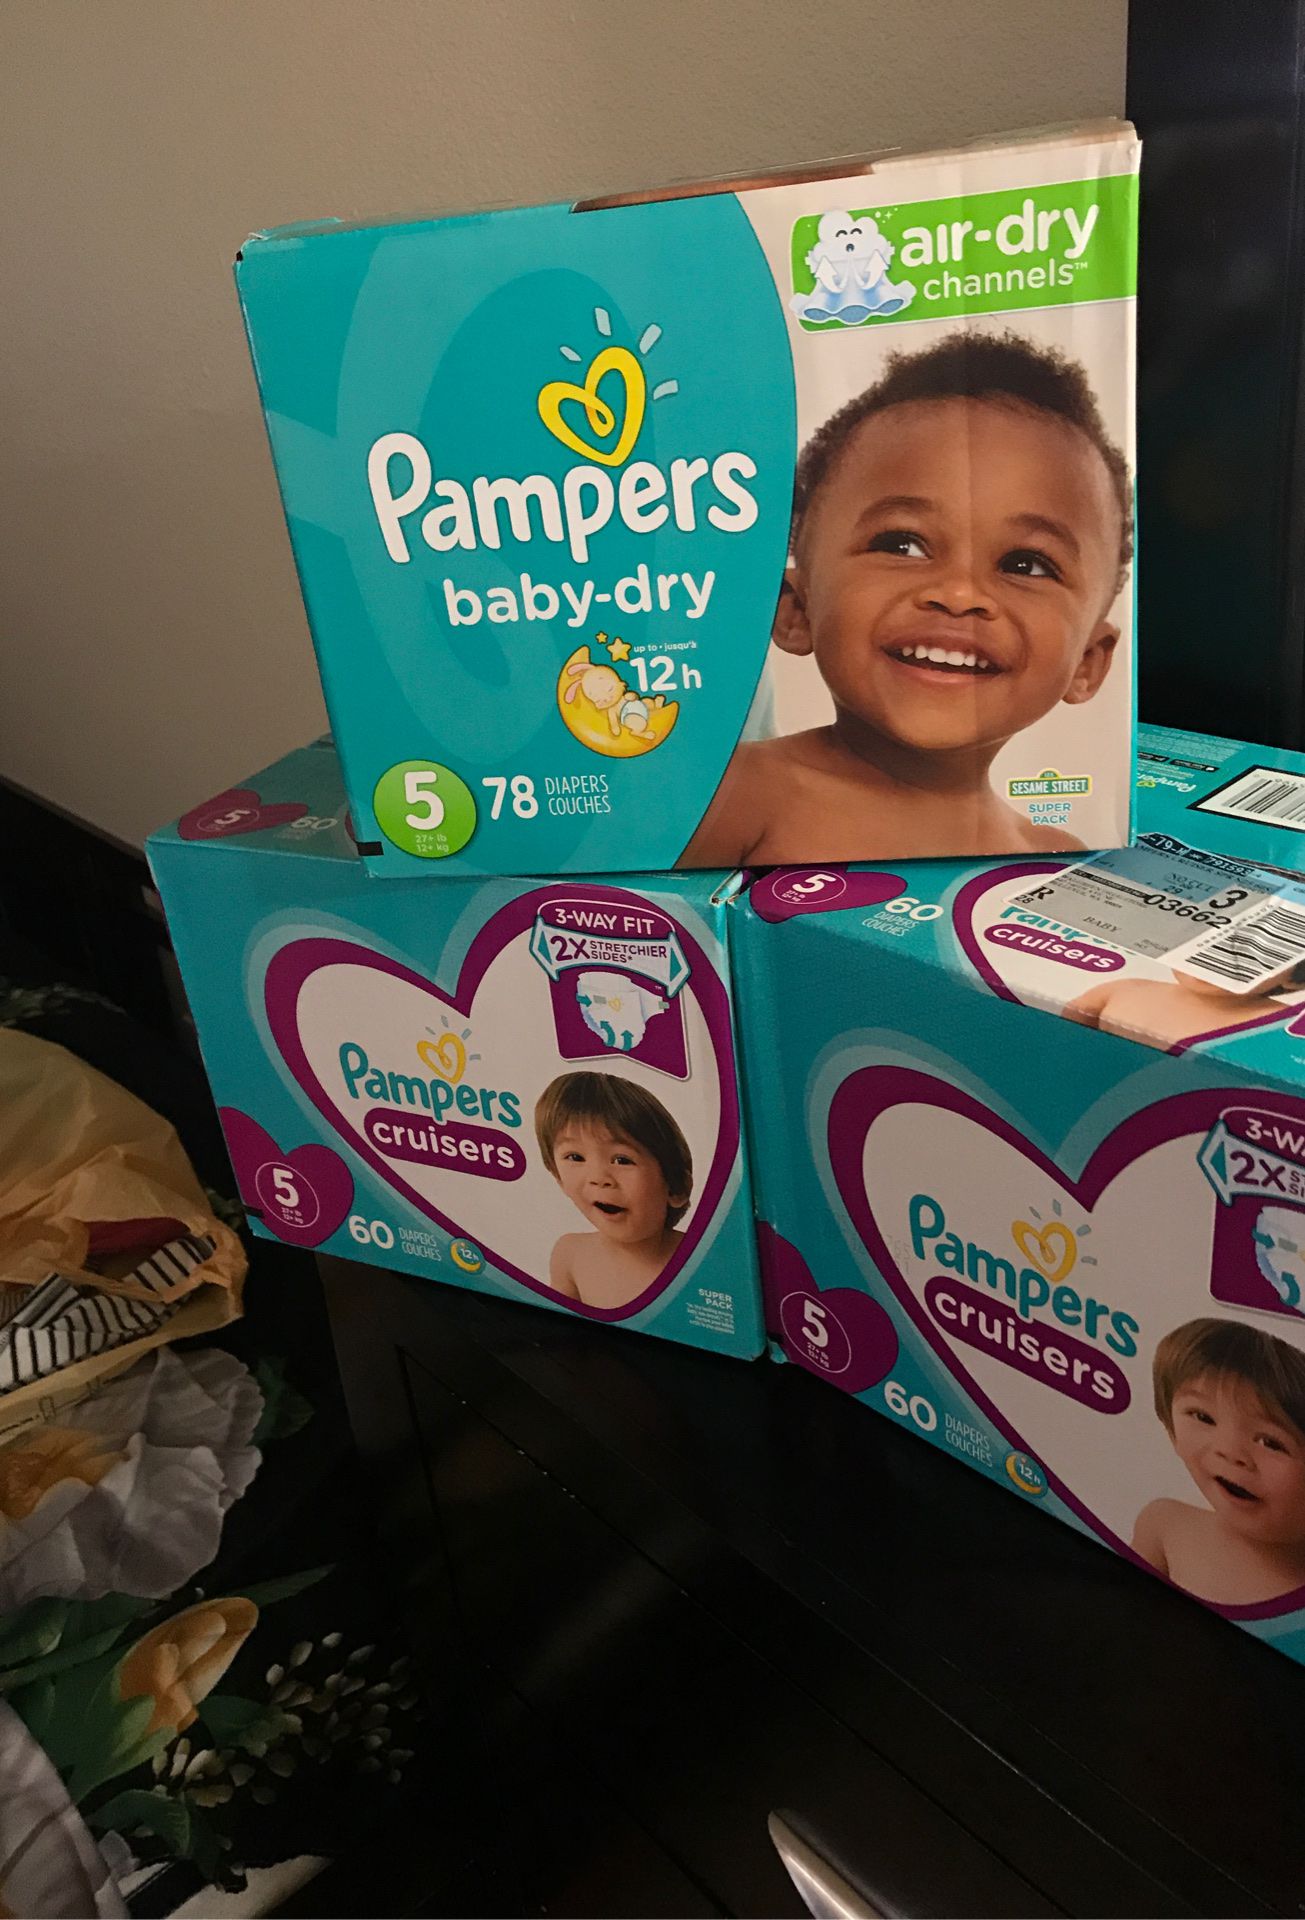 Pampers diapers size 5 (20$ each box)